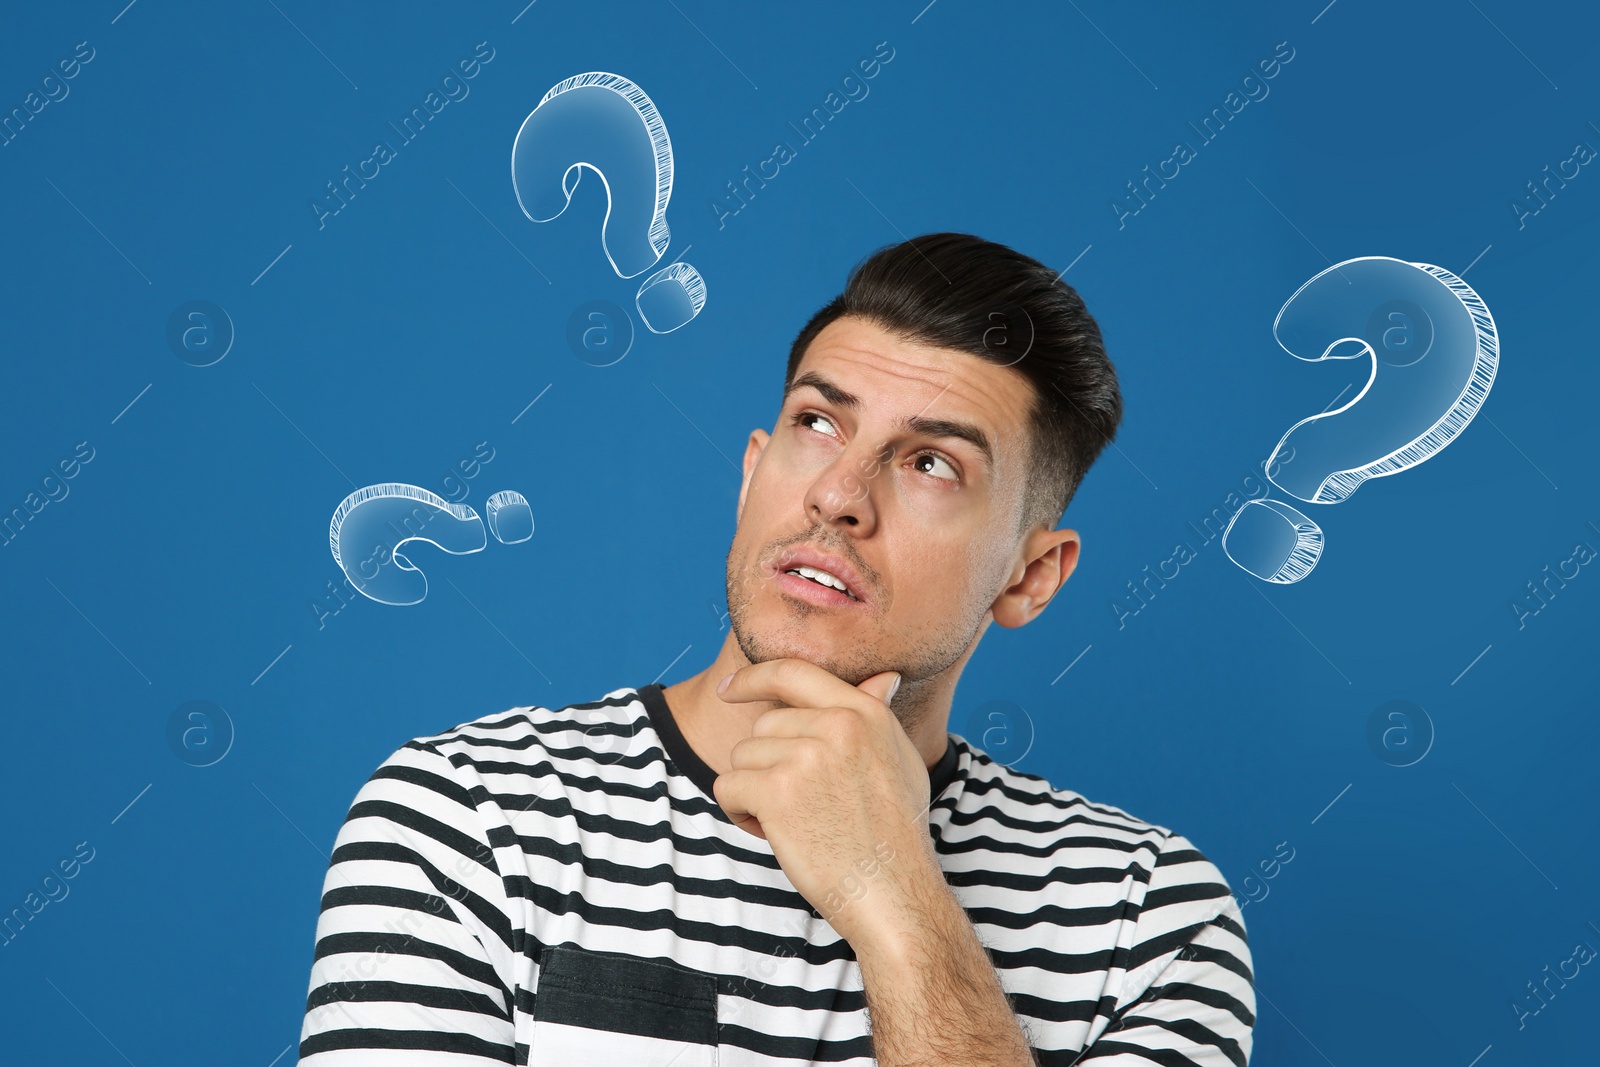 Image of Choice in profession or other areas of life, concept. Making decision, thoughtful man surrounded by drawn question marks on blue background